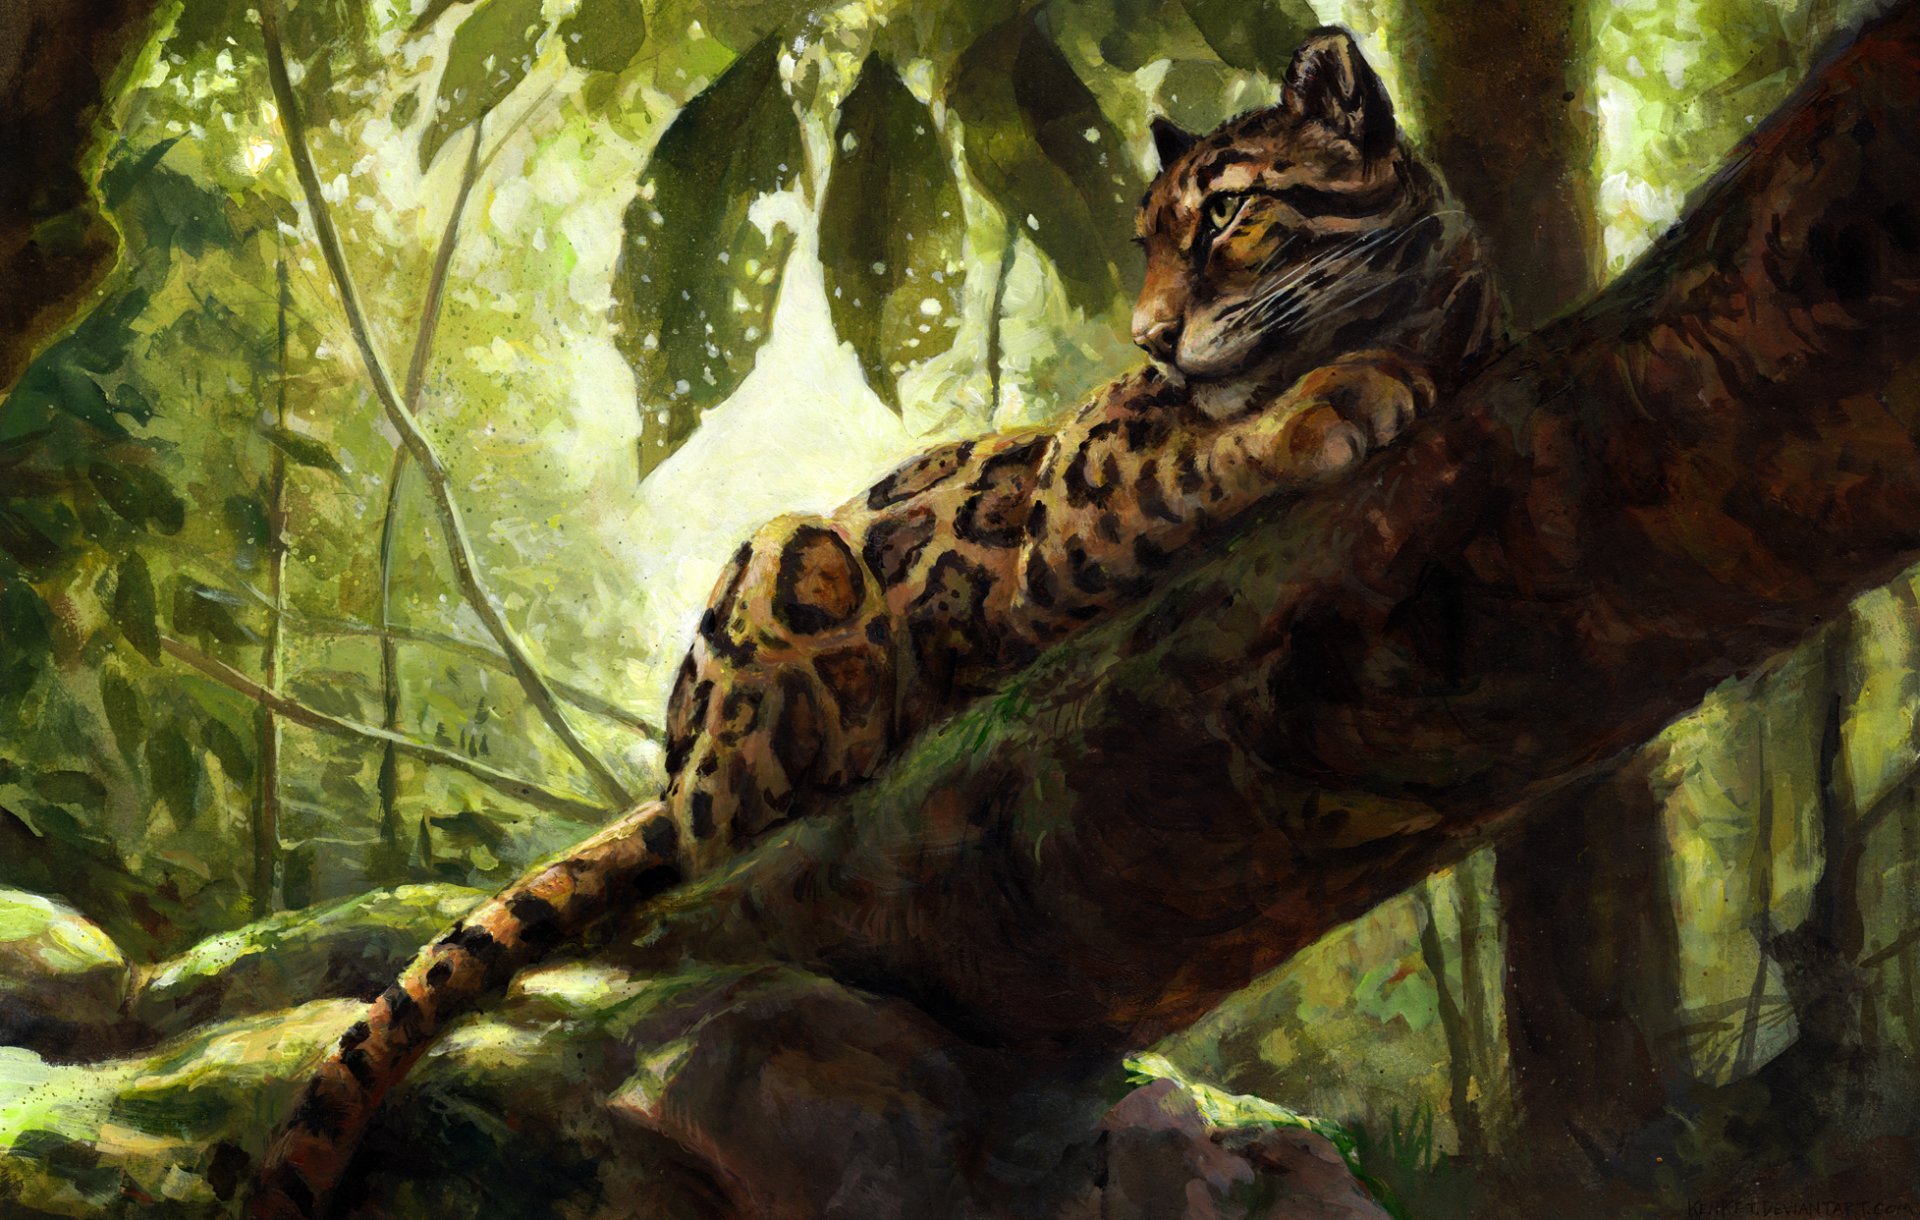 Download Jungle Painting Animal Clouded Leopard HD Wallpaper by Tess Garman